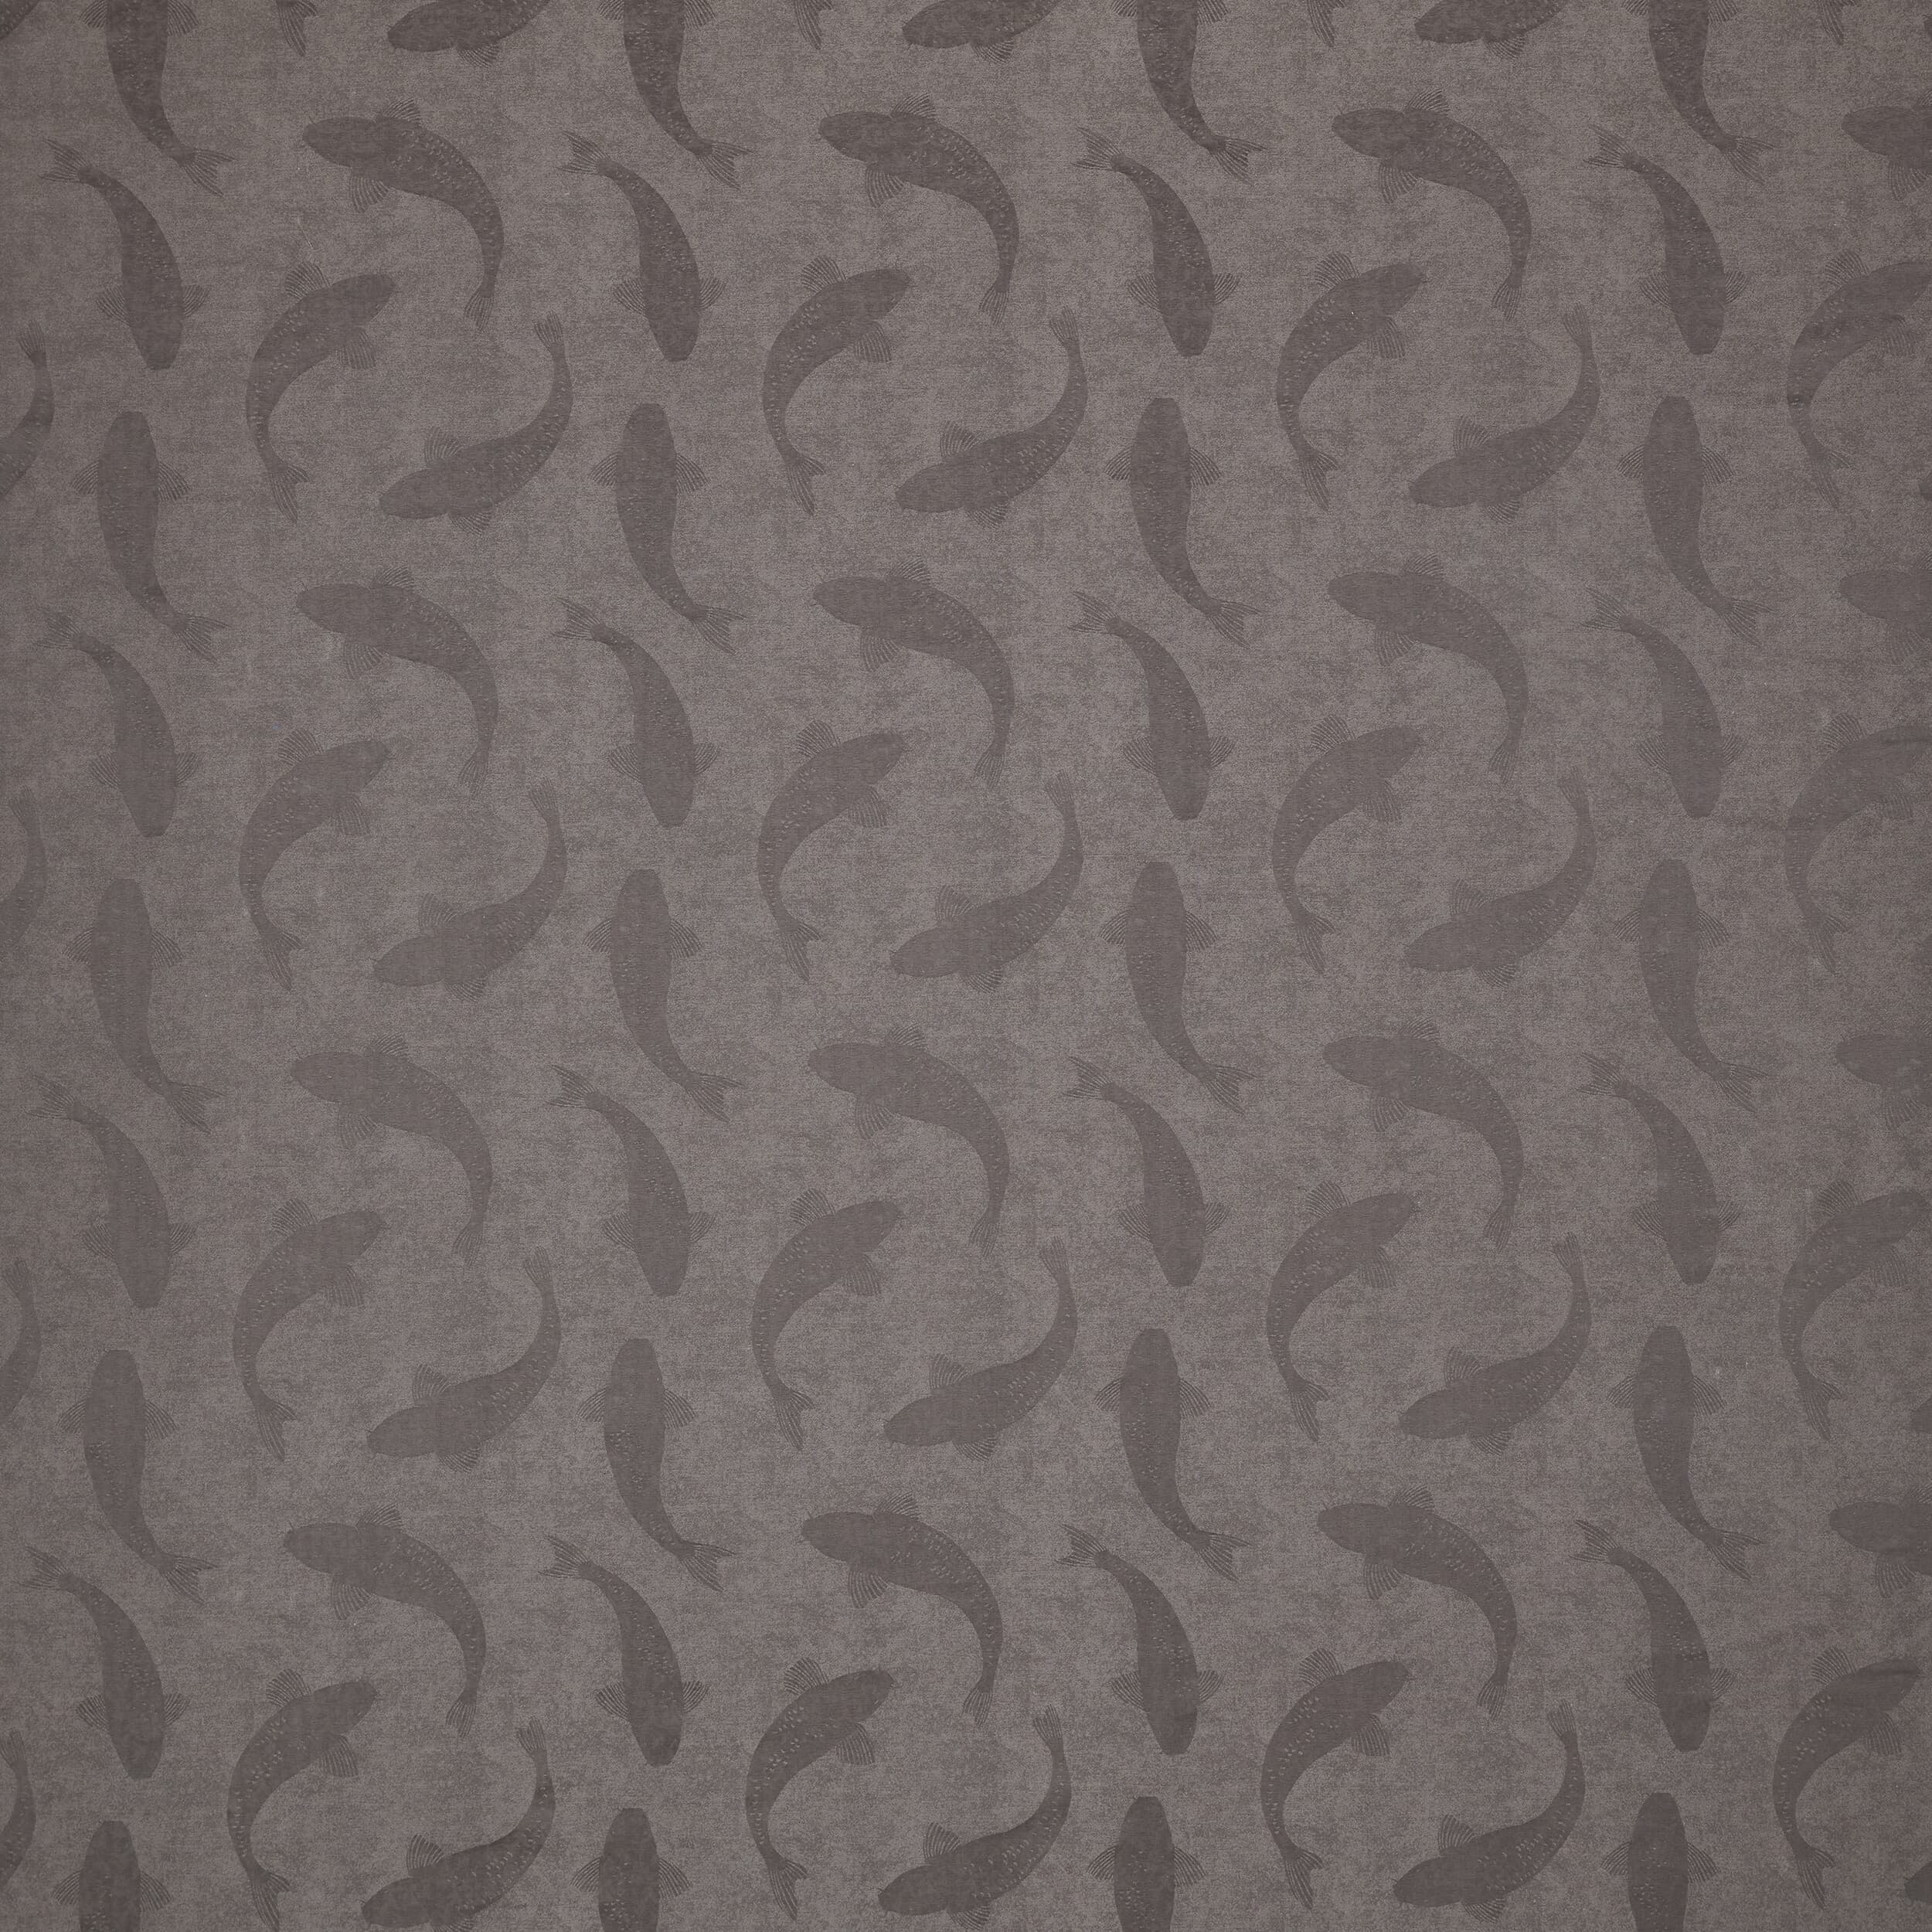 Eakins 2 Truffle by Stout Fabric